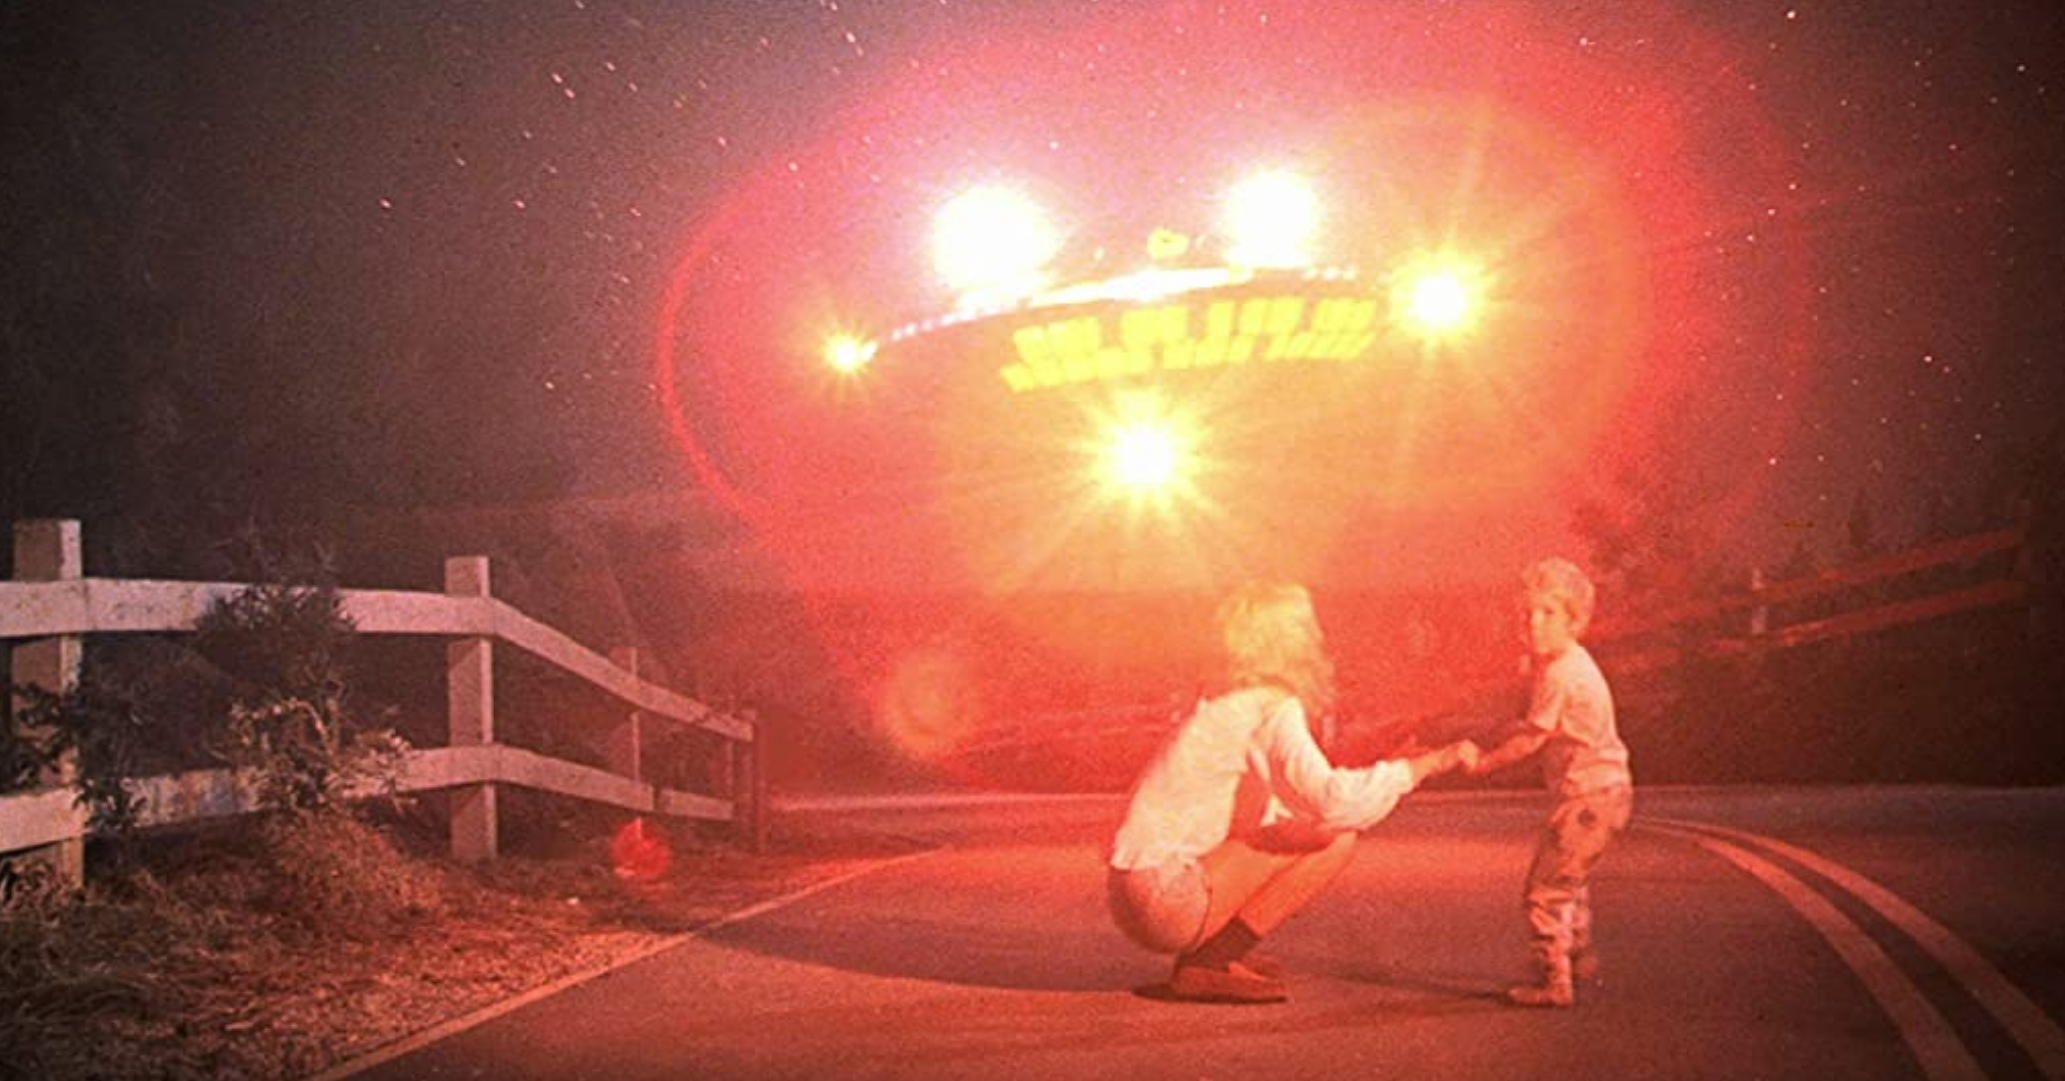 Melinda Dillon and Cary Guffey in “Close Encounters of the Third Kind” 